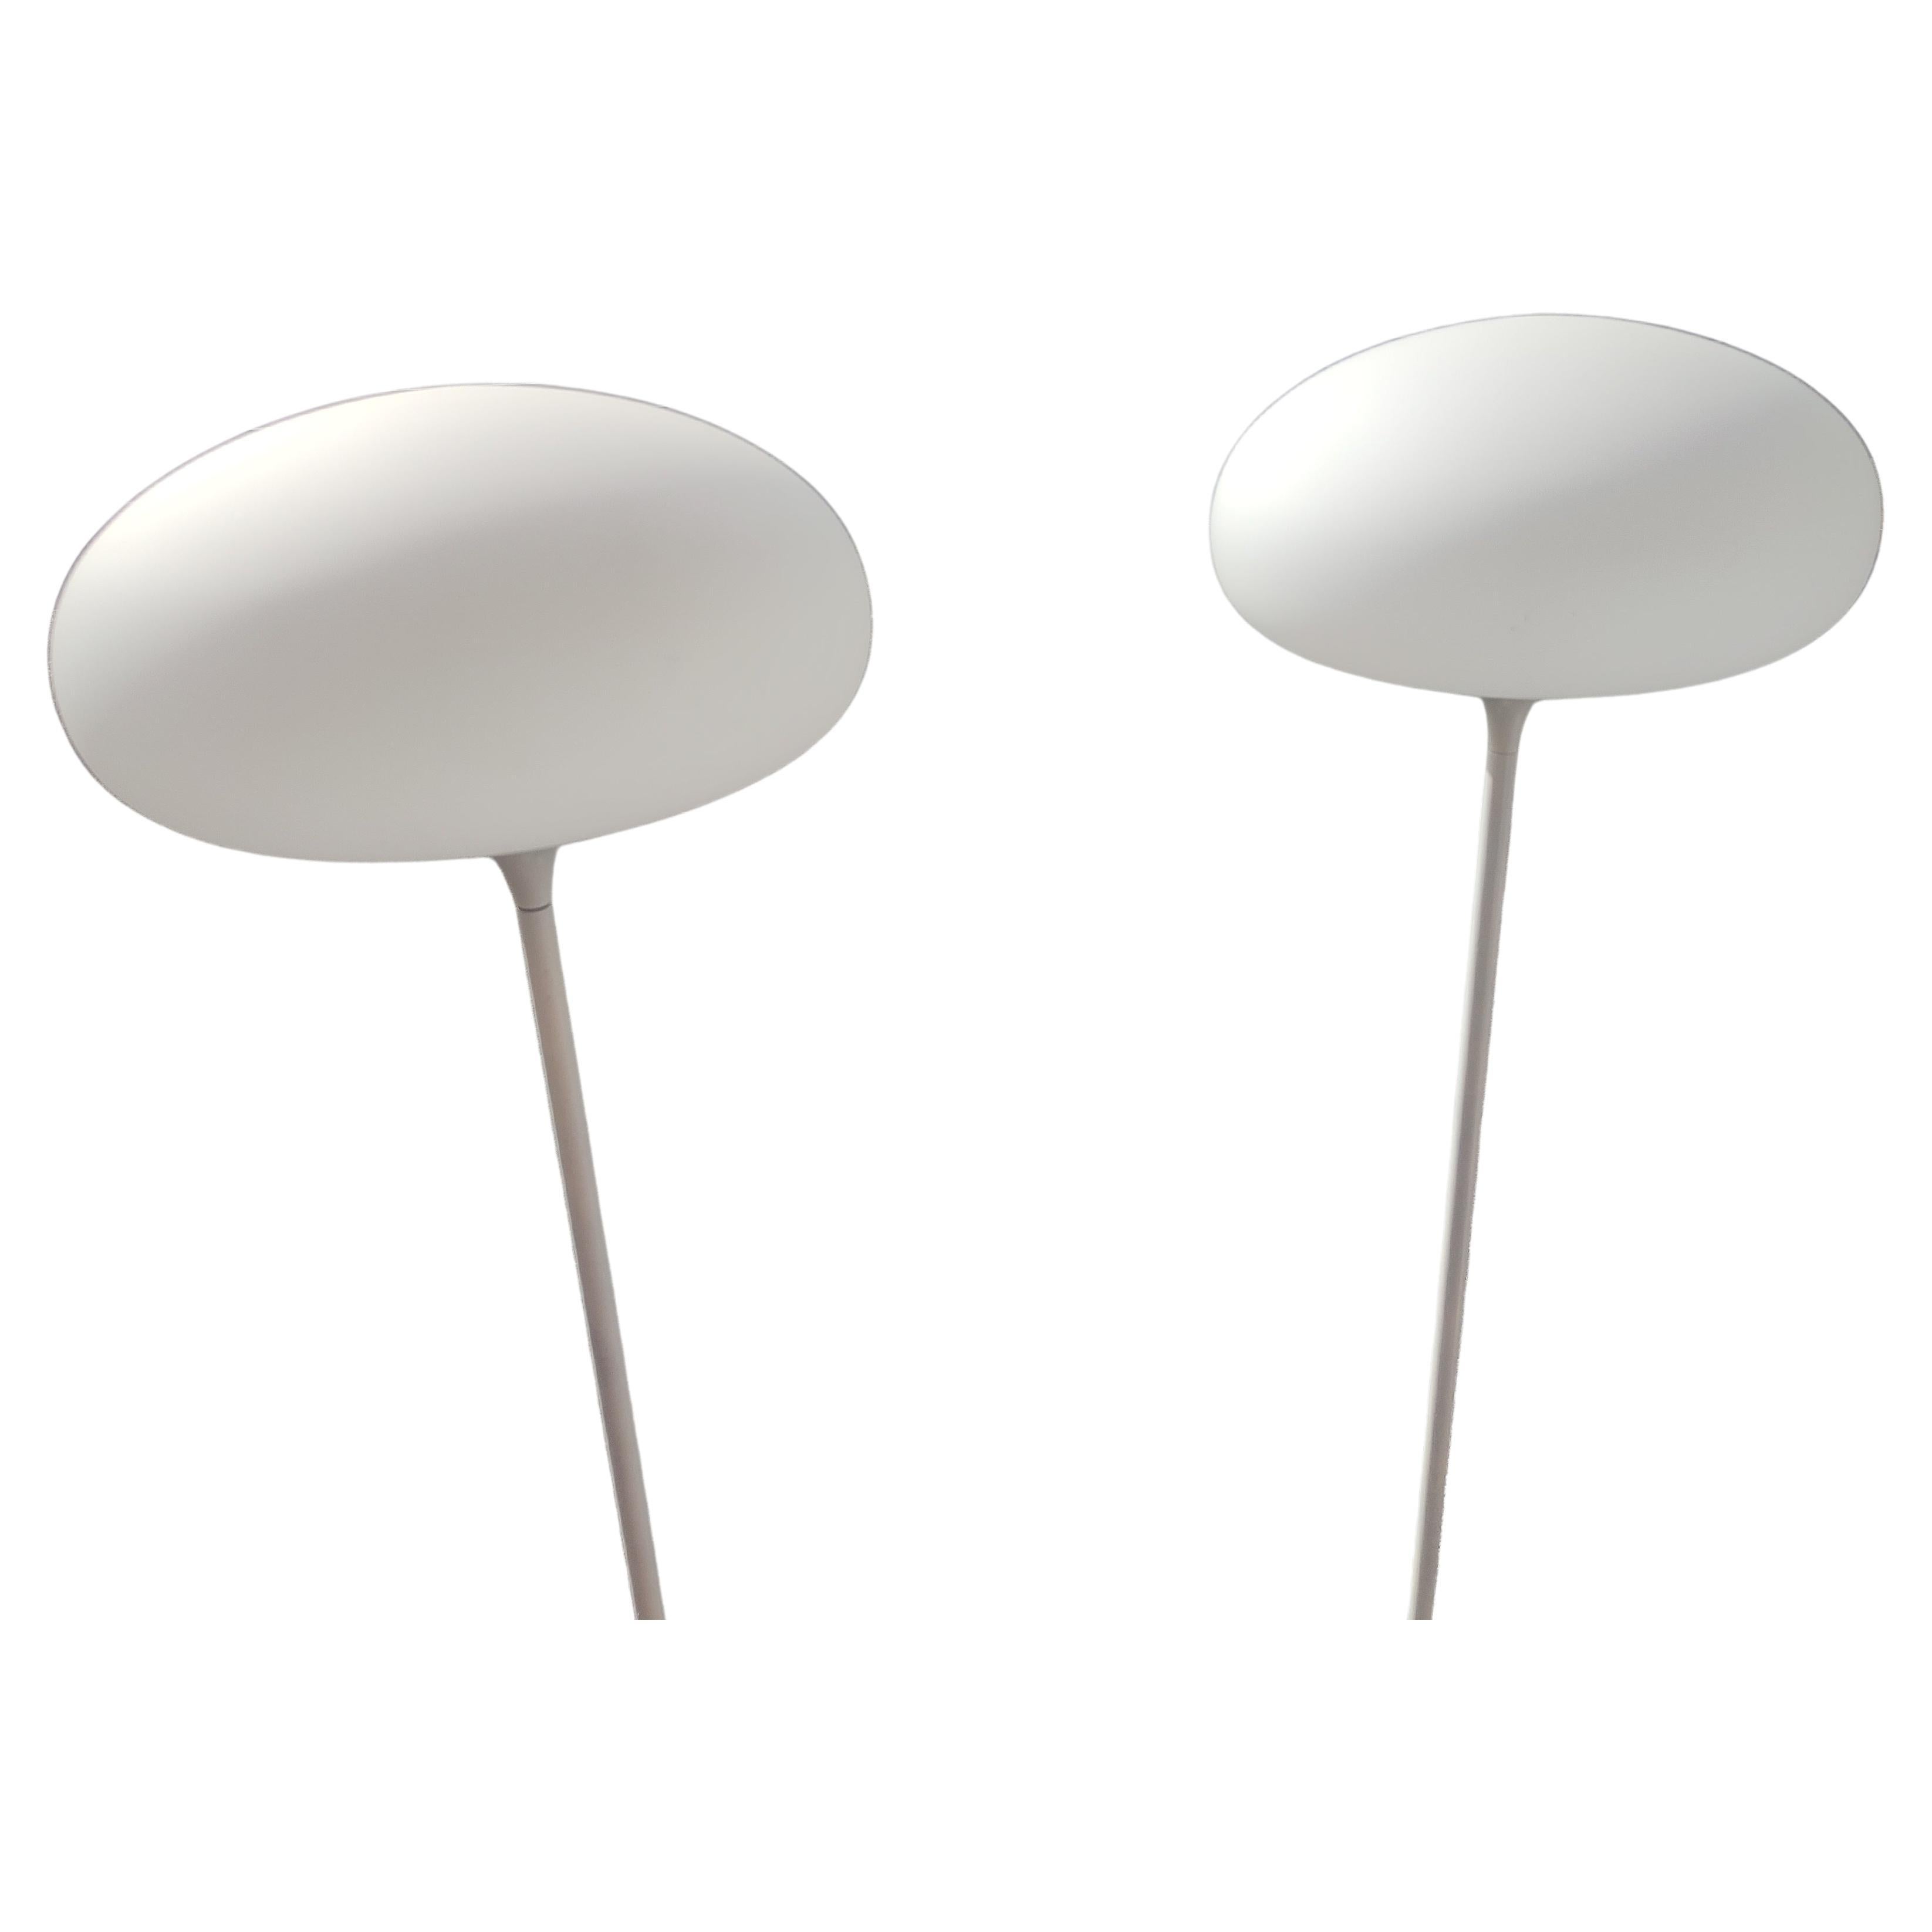 Pair of Mid Century Modern Sculptural Mushroom Floor Lamps by the Laurel Lamp Co In Good Condition For Sale In Port Jervis, NY